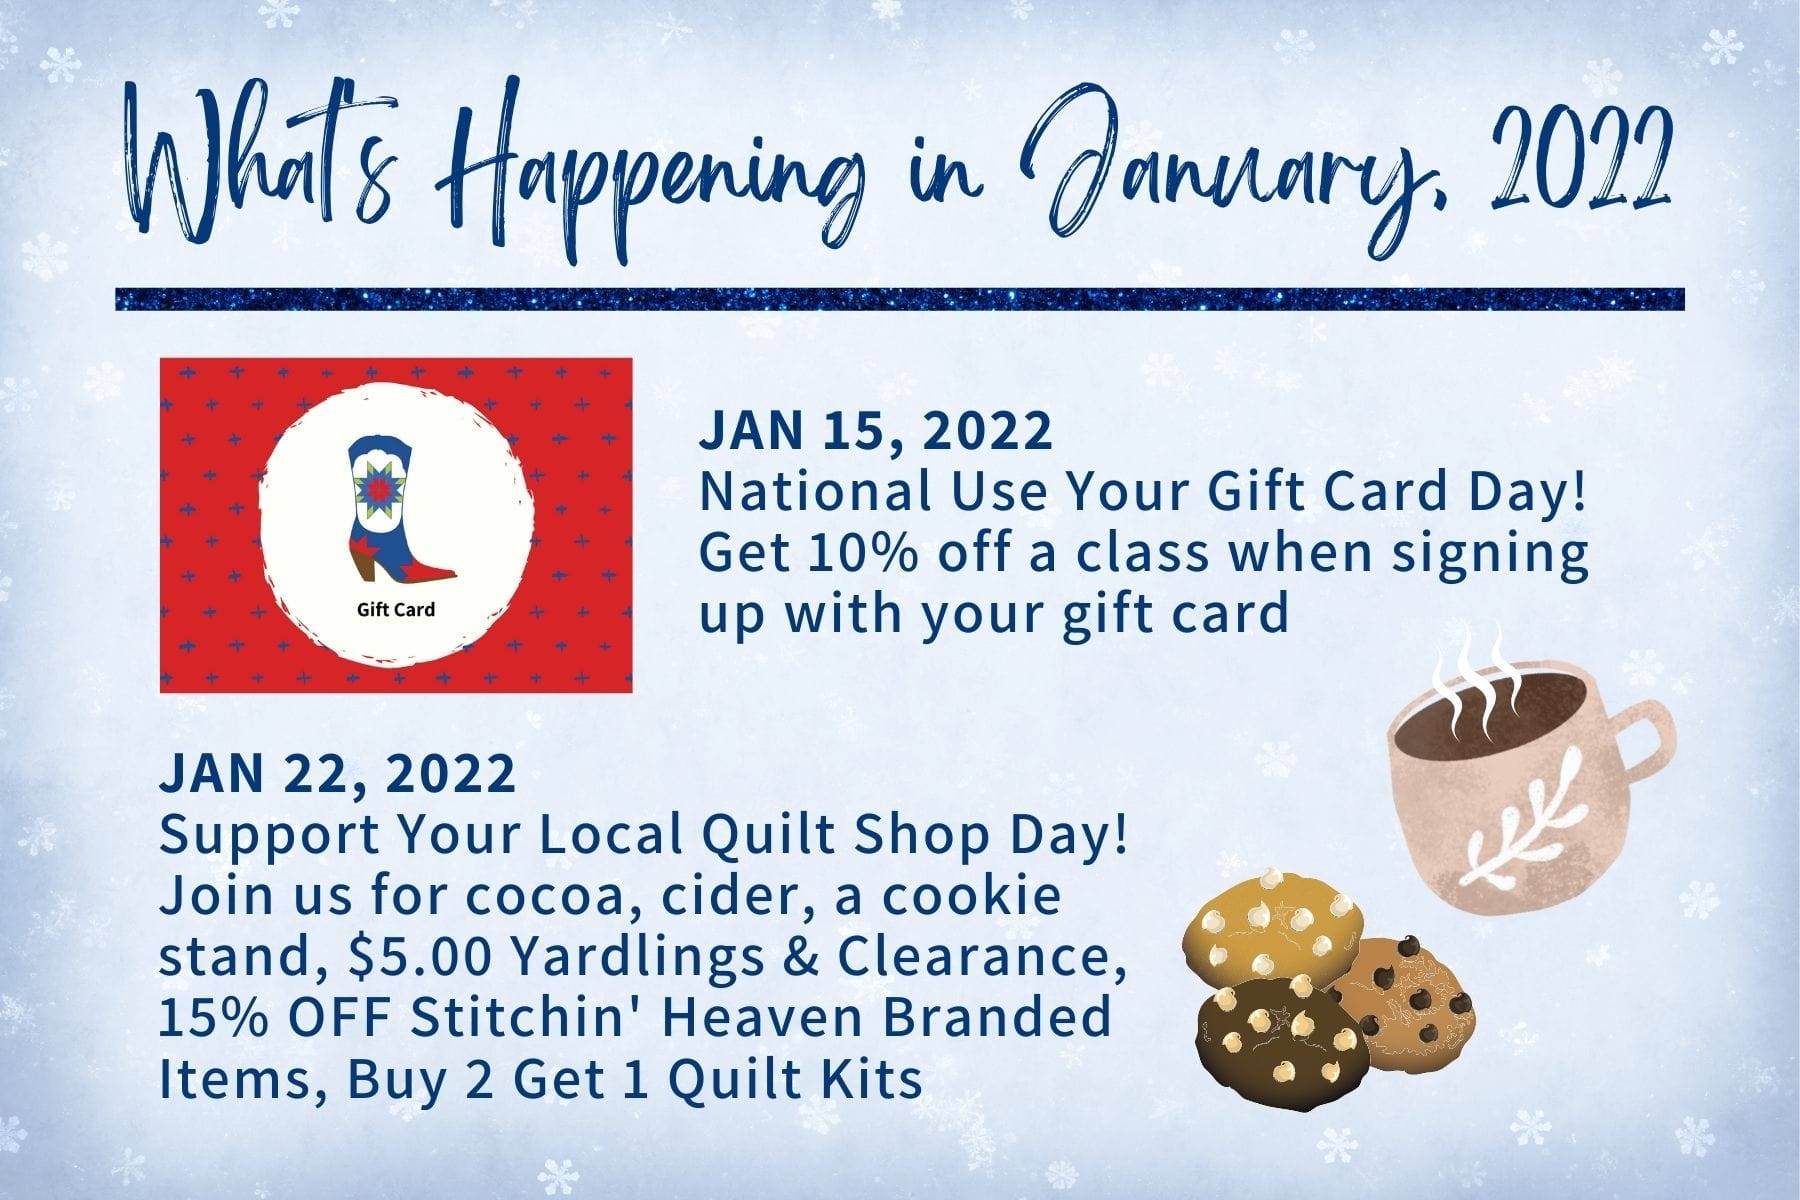 Support Your Local Quilt Shop Day! Join us for hot cocoa, apple cider and cookies. Plus save on End of Bolt fabric, Stitchin' Heaven branded items, and quilt kits!